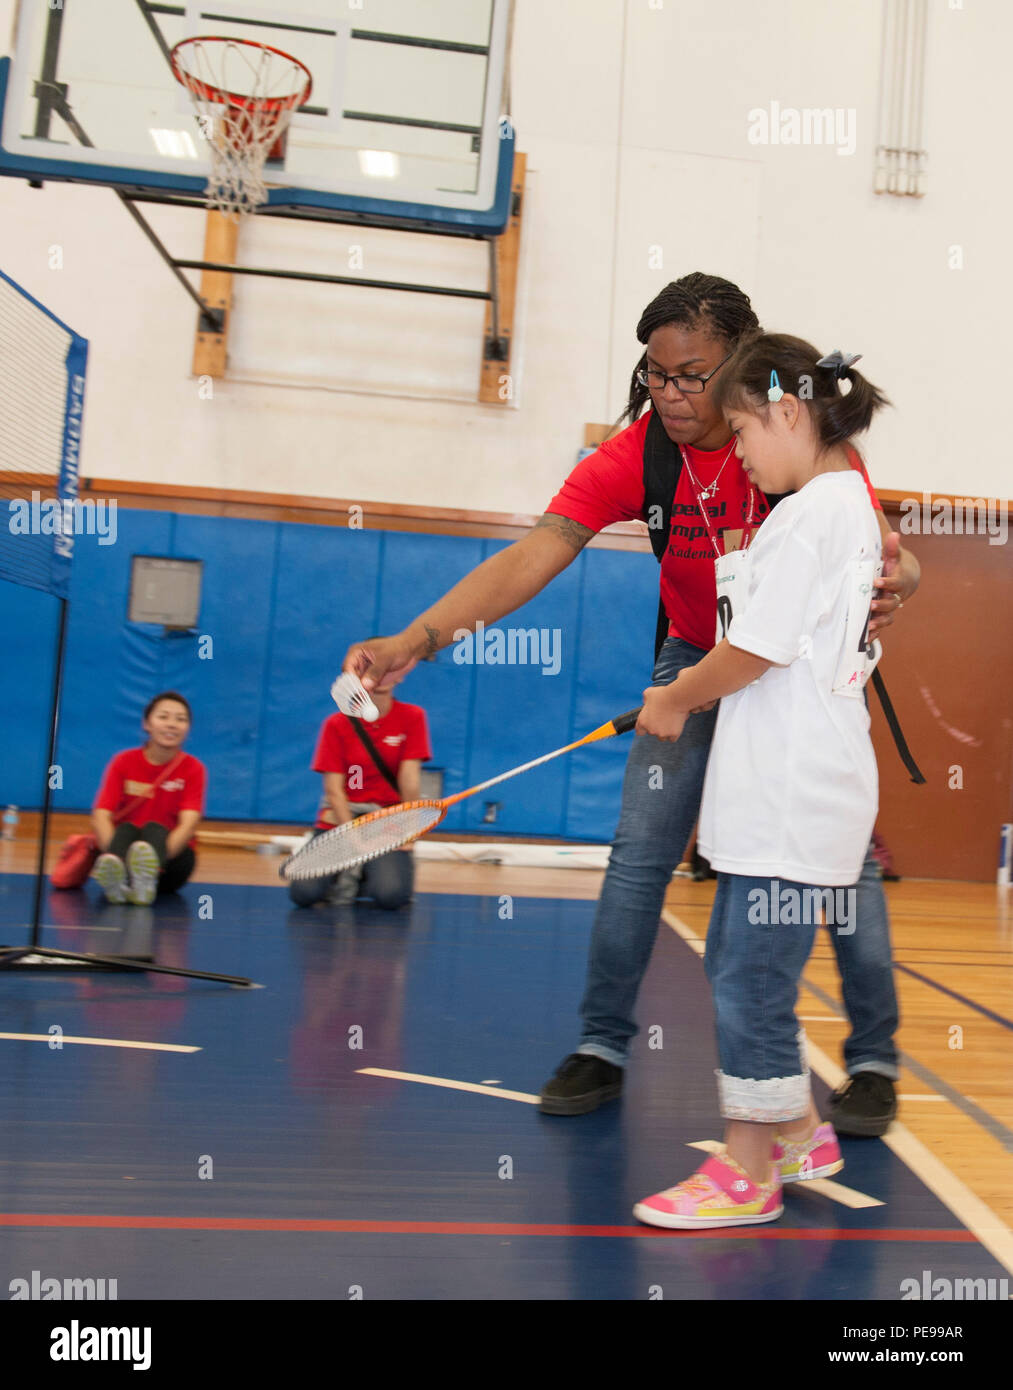 U.S. Air Force Airman 1st Class Amiya Jones, 18th Security Forces Squadron armorer, helps Yuri Yonaha, a Kadena Special Olympics athlete, with her badminton skills during the Kadena Special Olympics, Nov. 7, 2015, at Kadena Air Base, Japan. This year marks the 16th anniversary of KSO, a sporting event dedicated to enriching the lives of American and Okinawan special needs individuals on the island. (U.S. Air Force photo by Airman 1st Class Lynette M. Rolen) Stock Photo